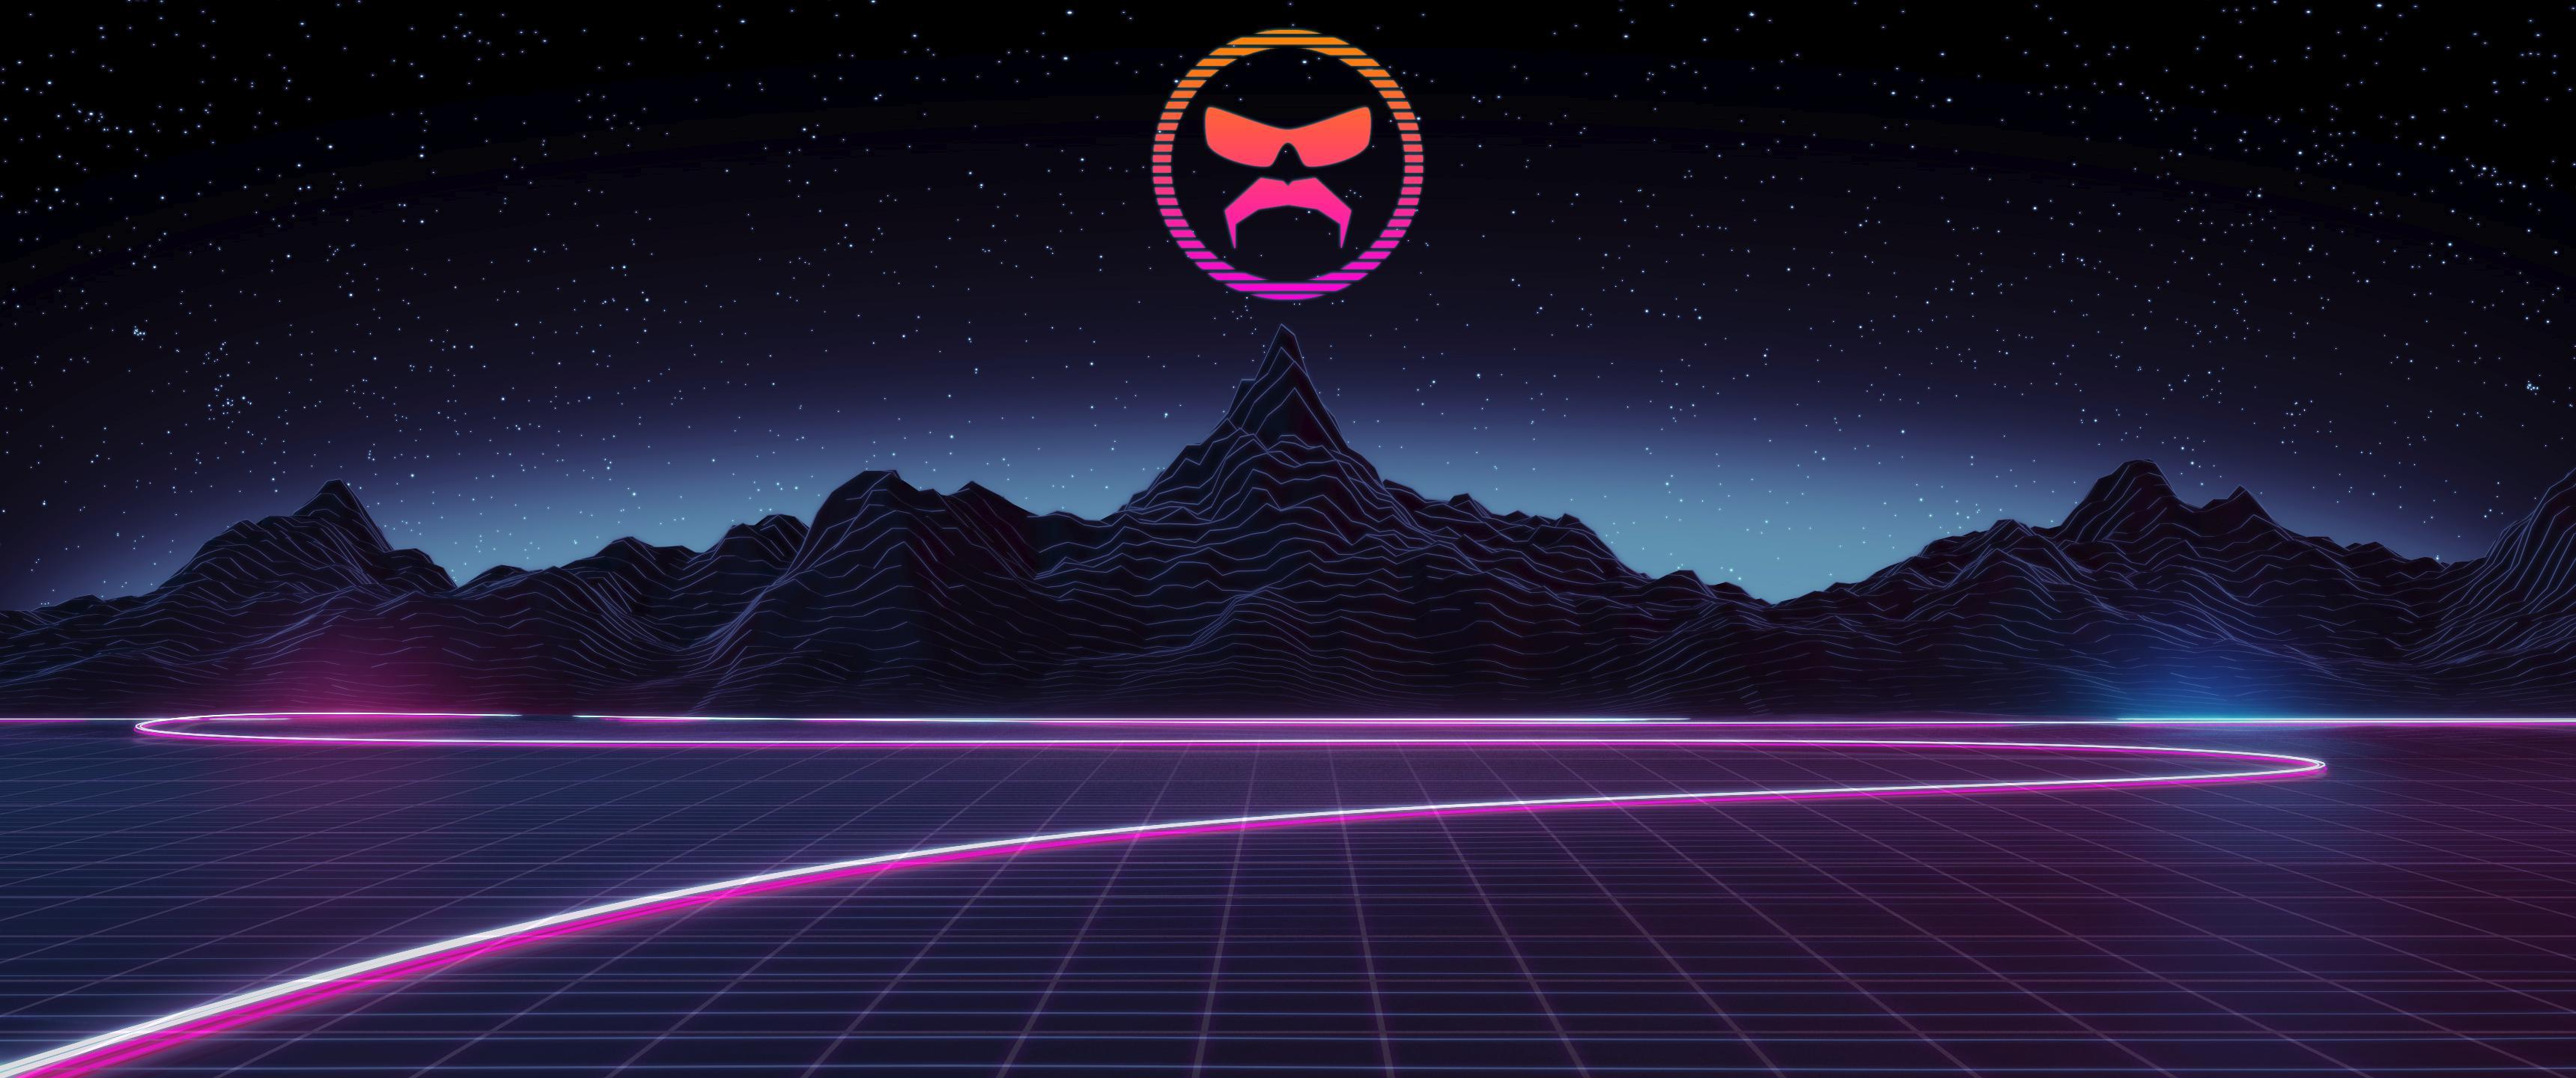 I made some Outrun style wallpaper with Doc's logo!